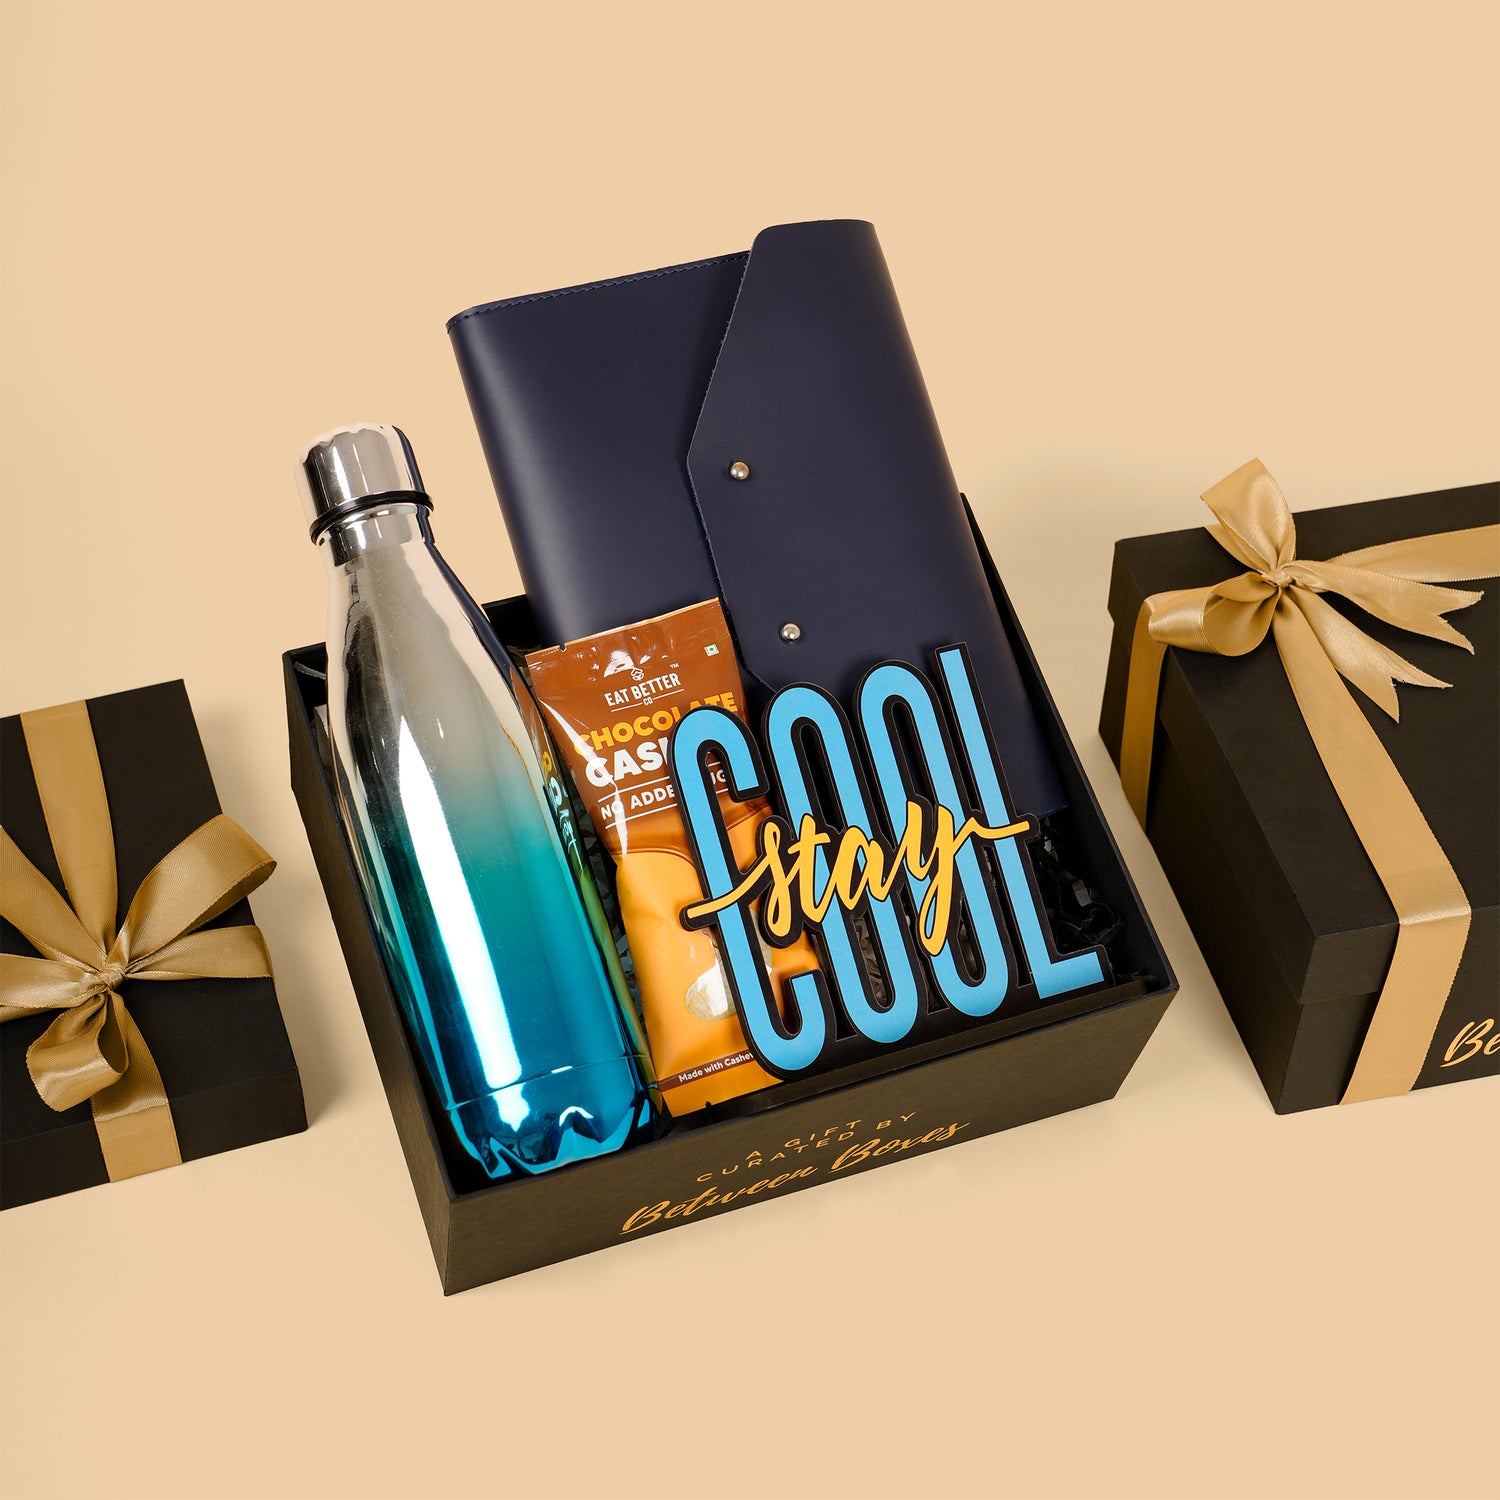 Boss Gift Hamper - Between Boxes Gifts